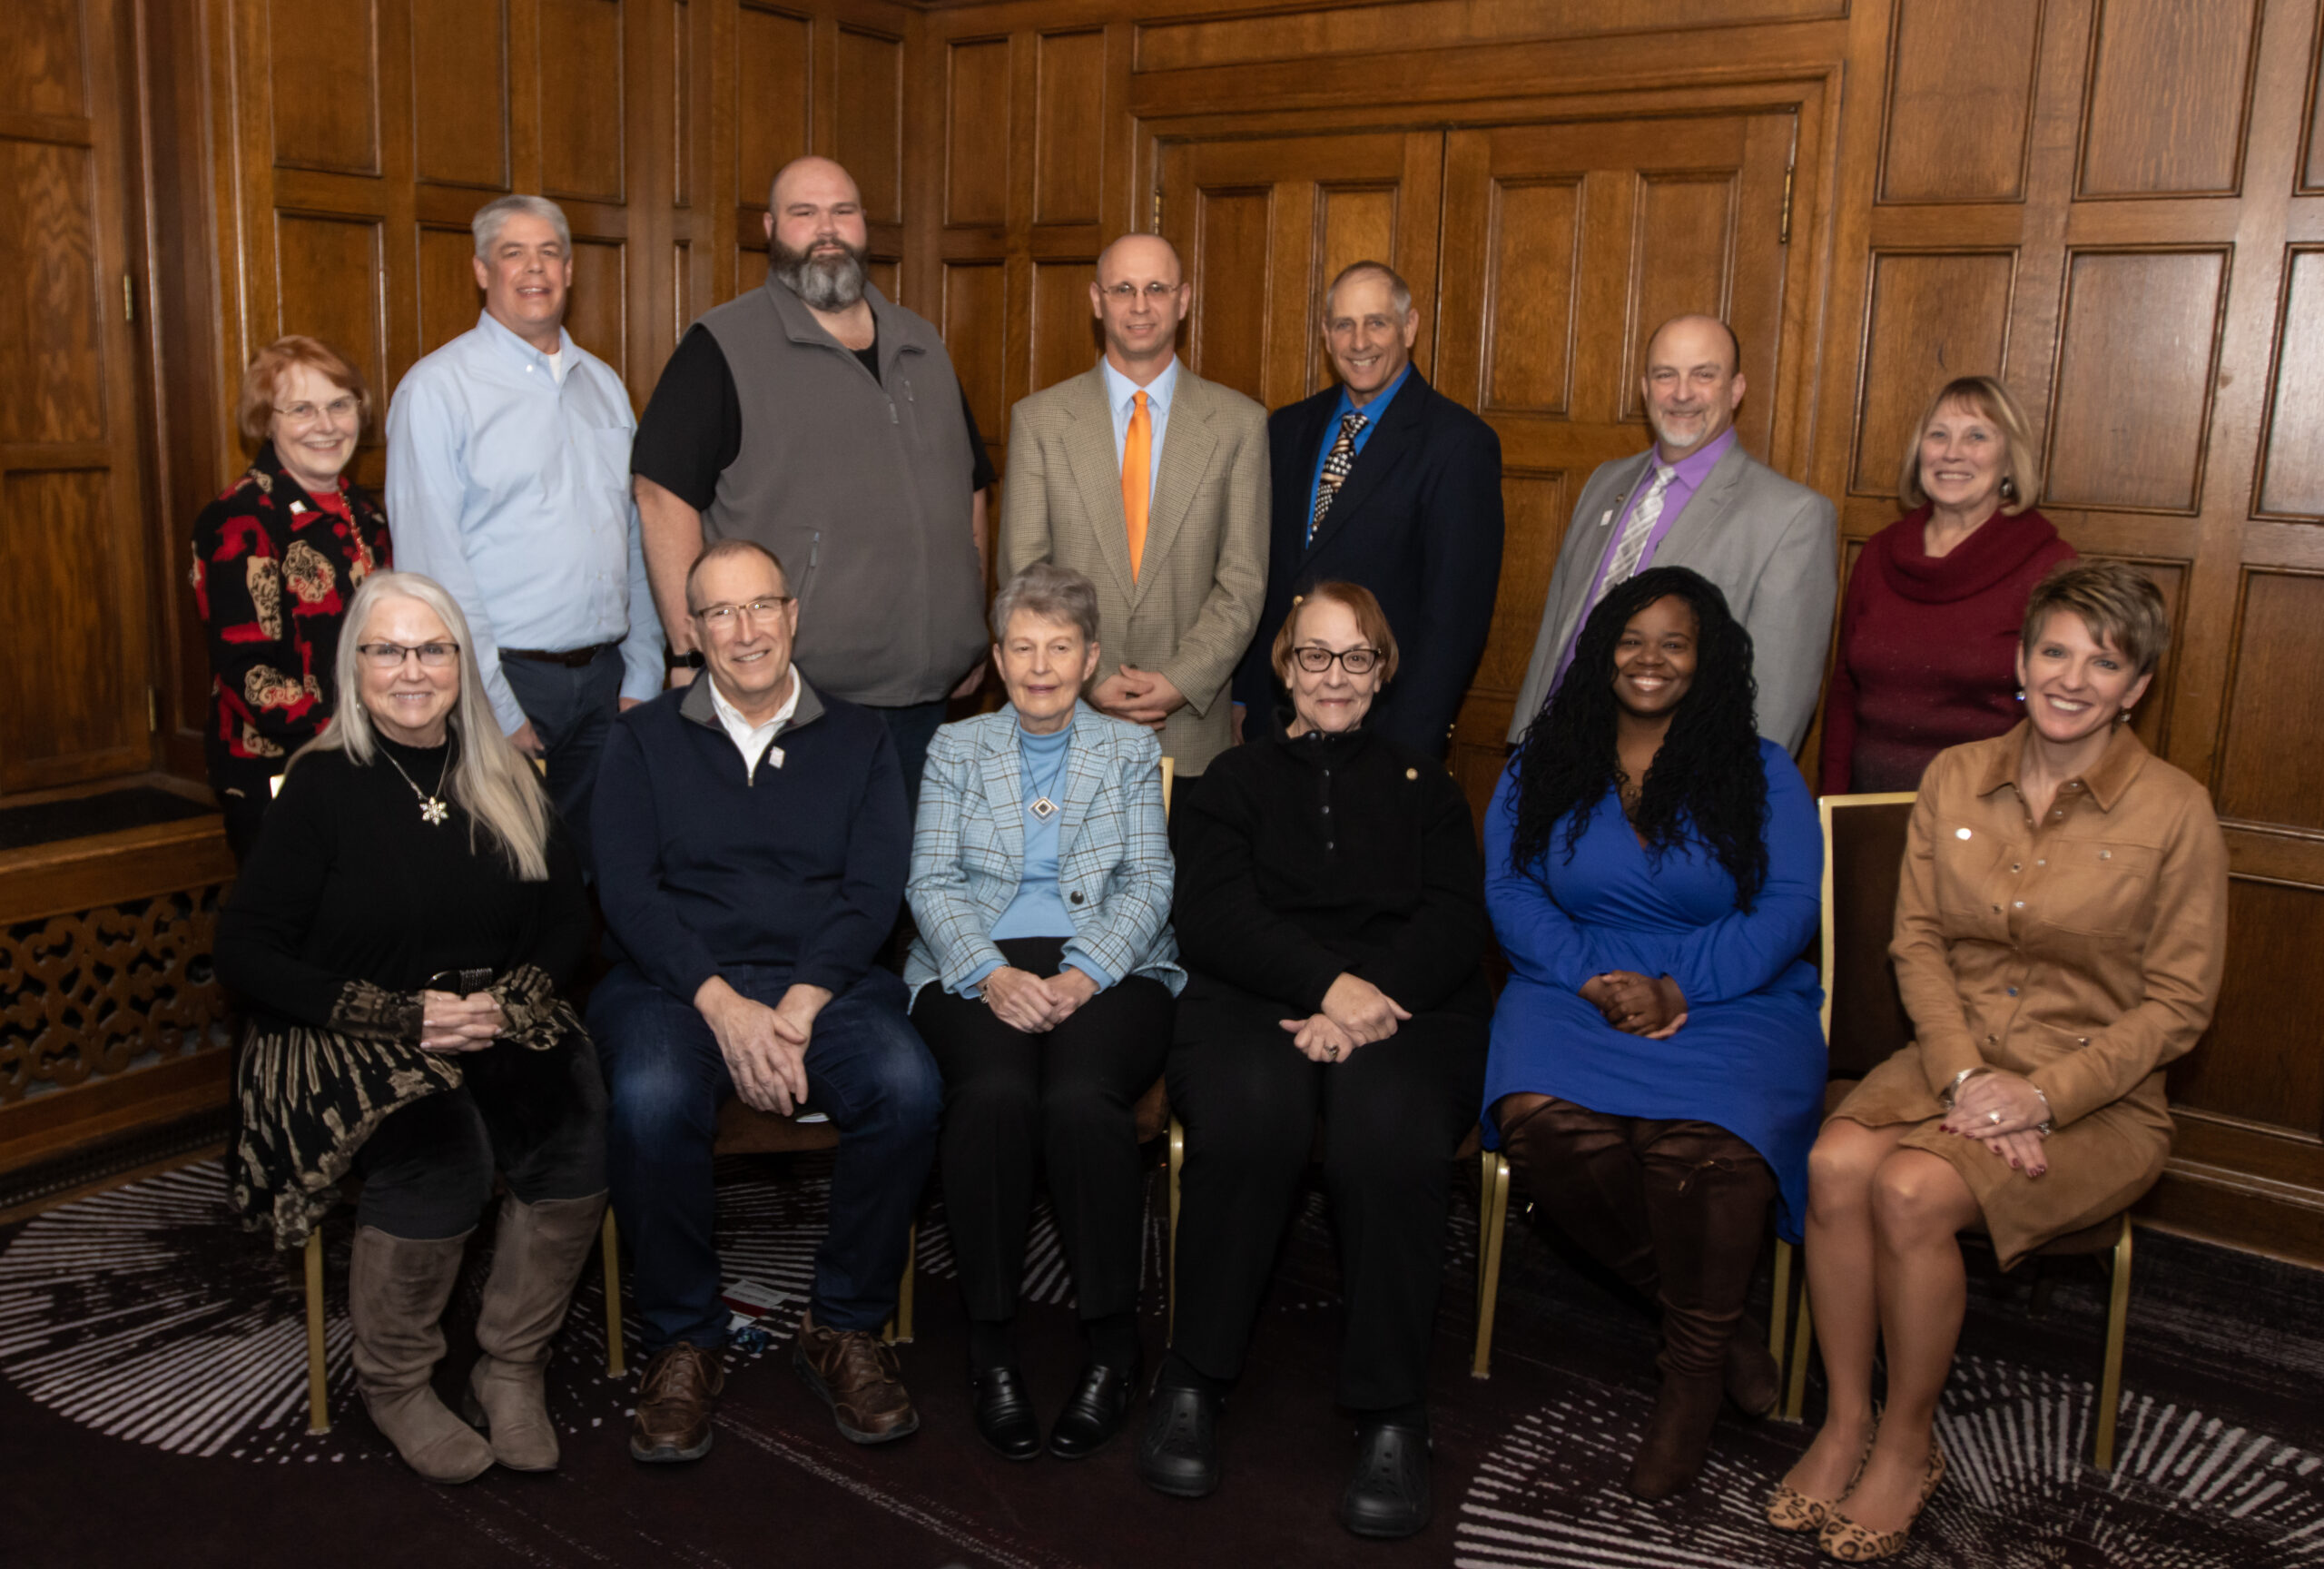 The WASB Board of Directors